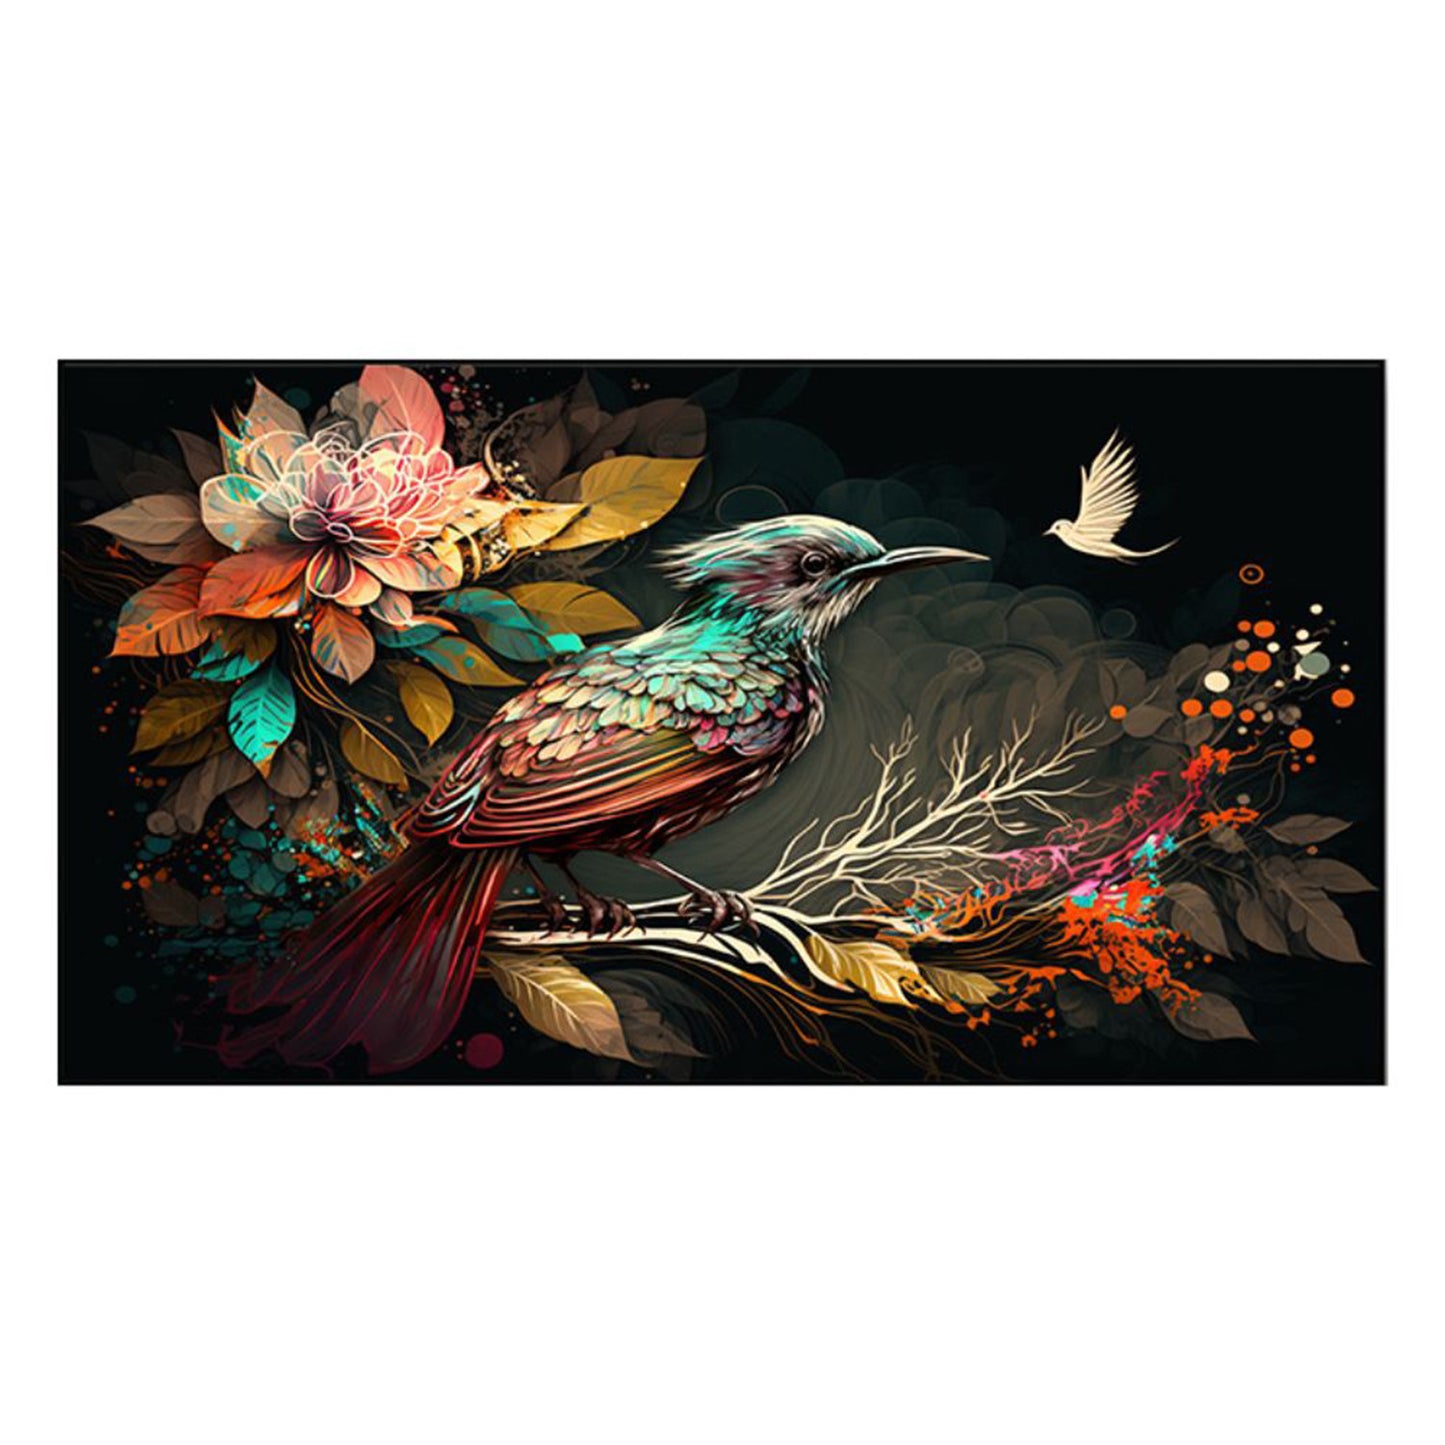 Colorful Bird and Floral Branch Wall Painting